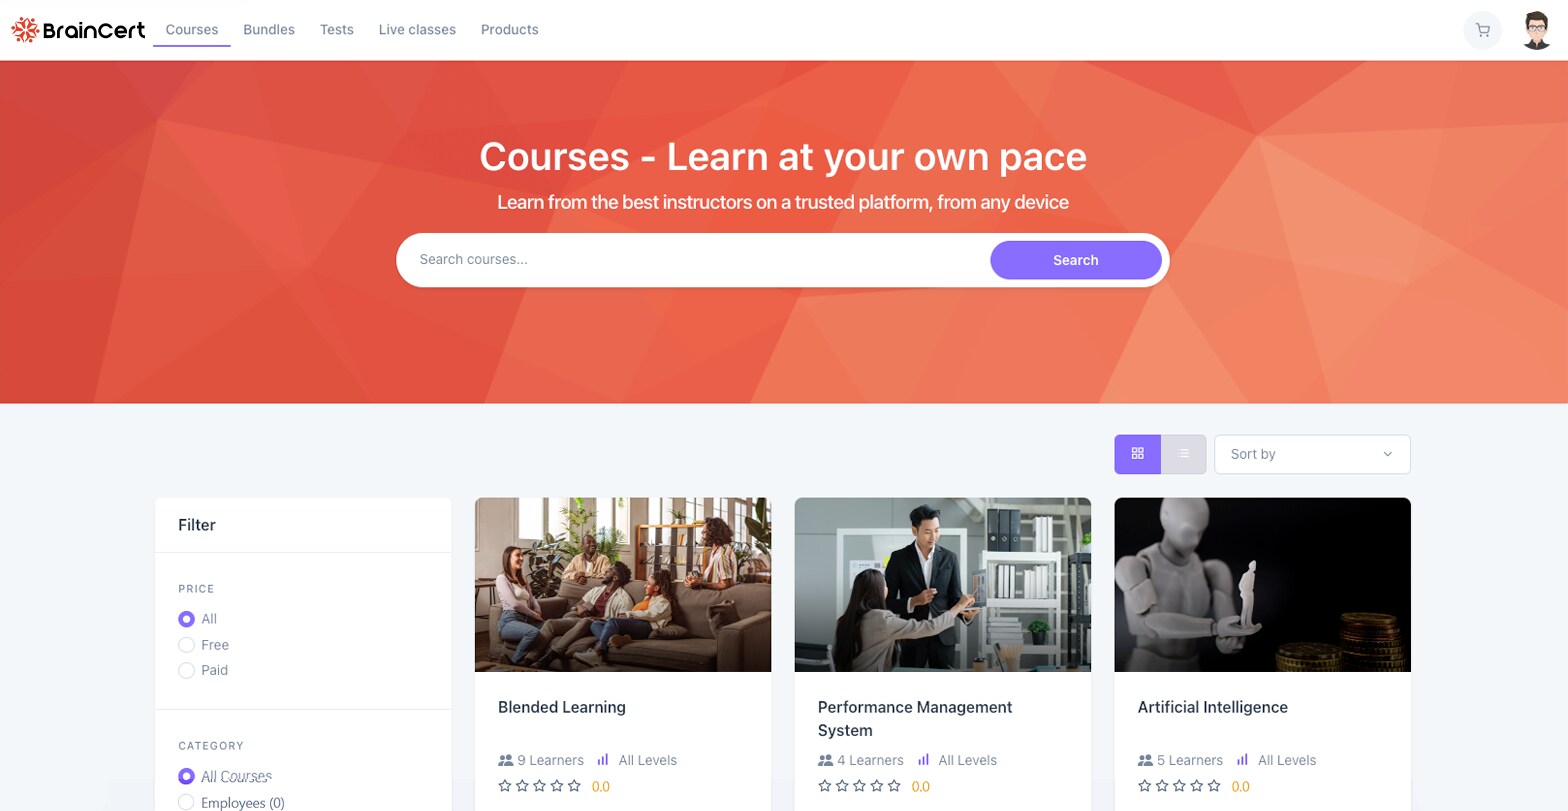 Redesigned Catalog Pages ­has a fresh new look, making it easier than ever for learners to explore and discover your courses, tests, bundles, products, and live classes.